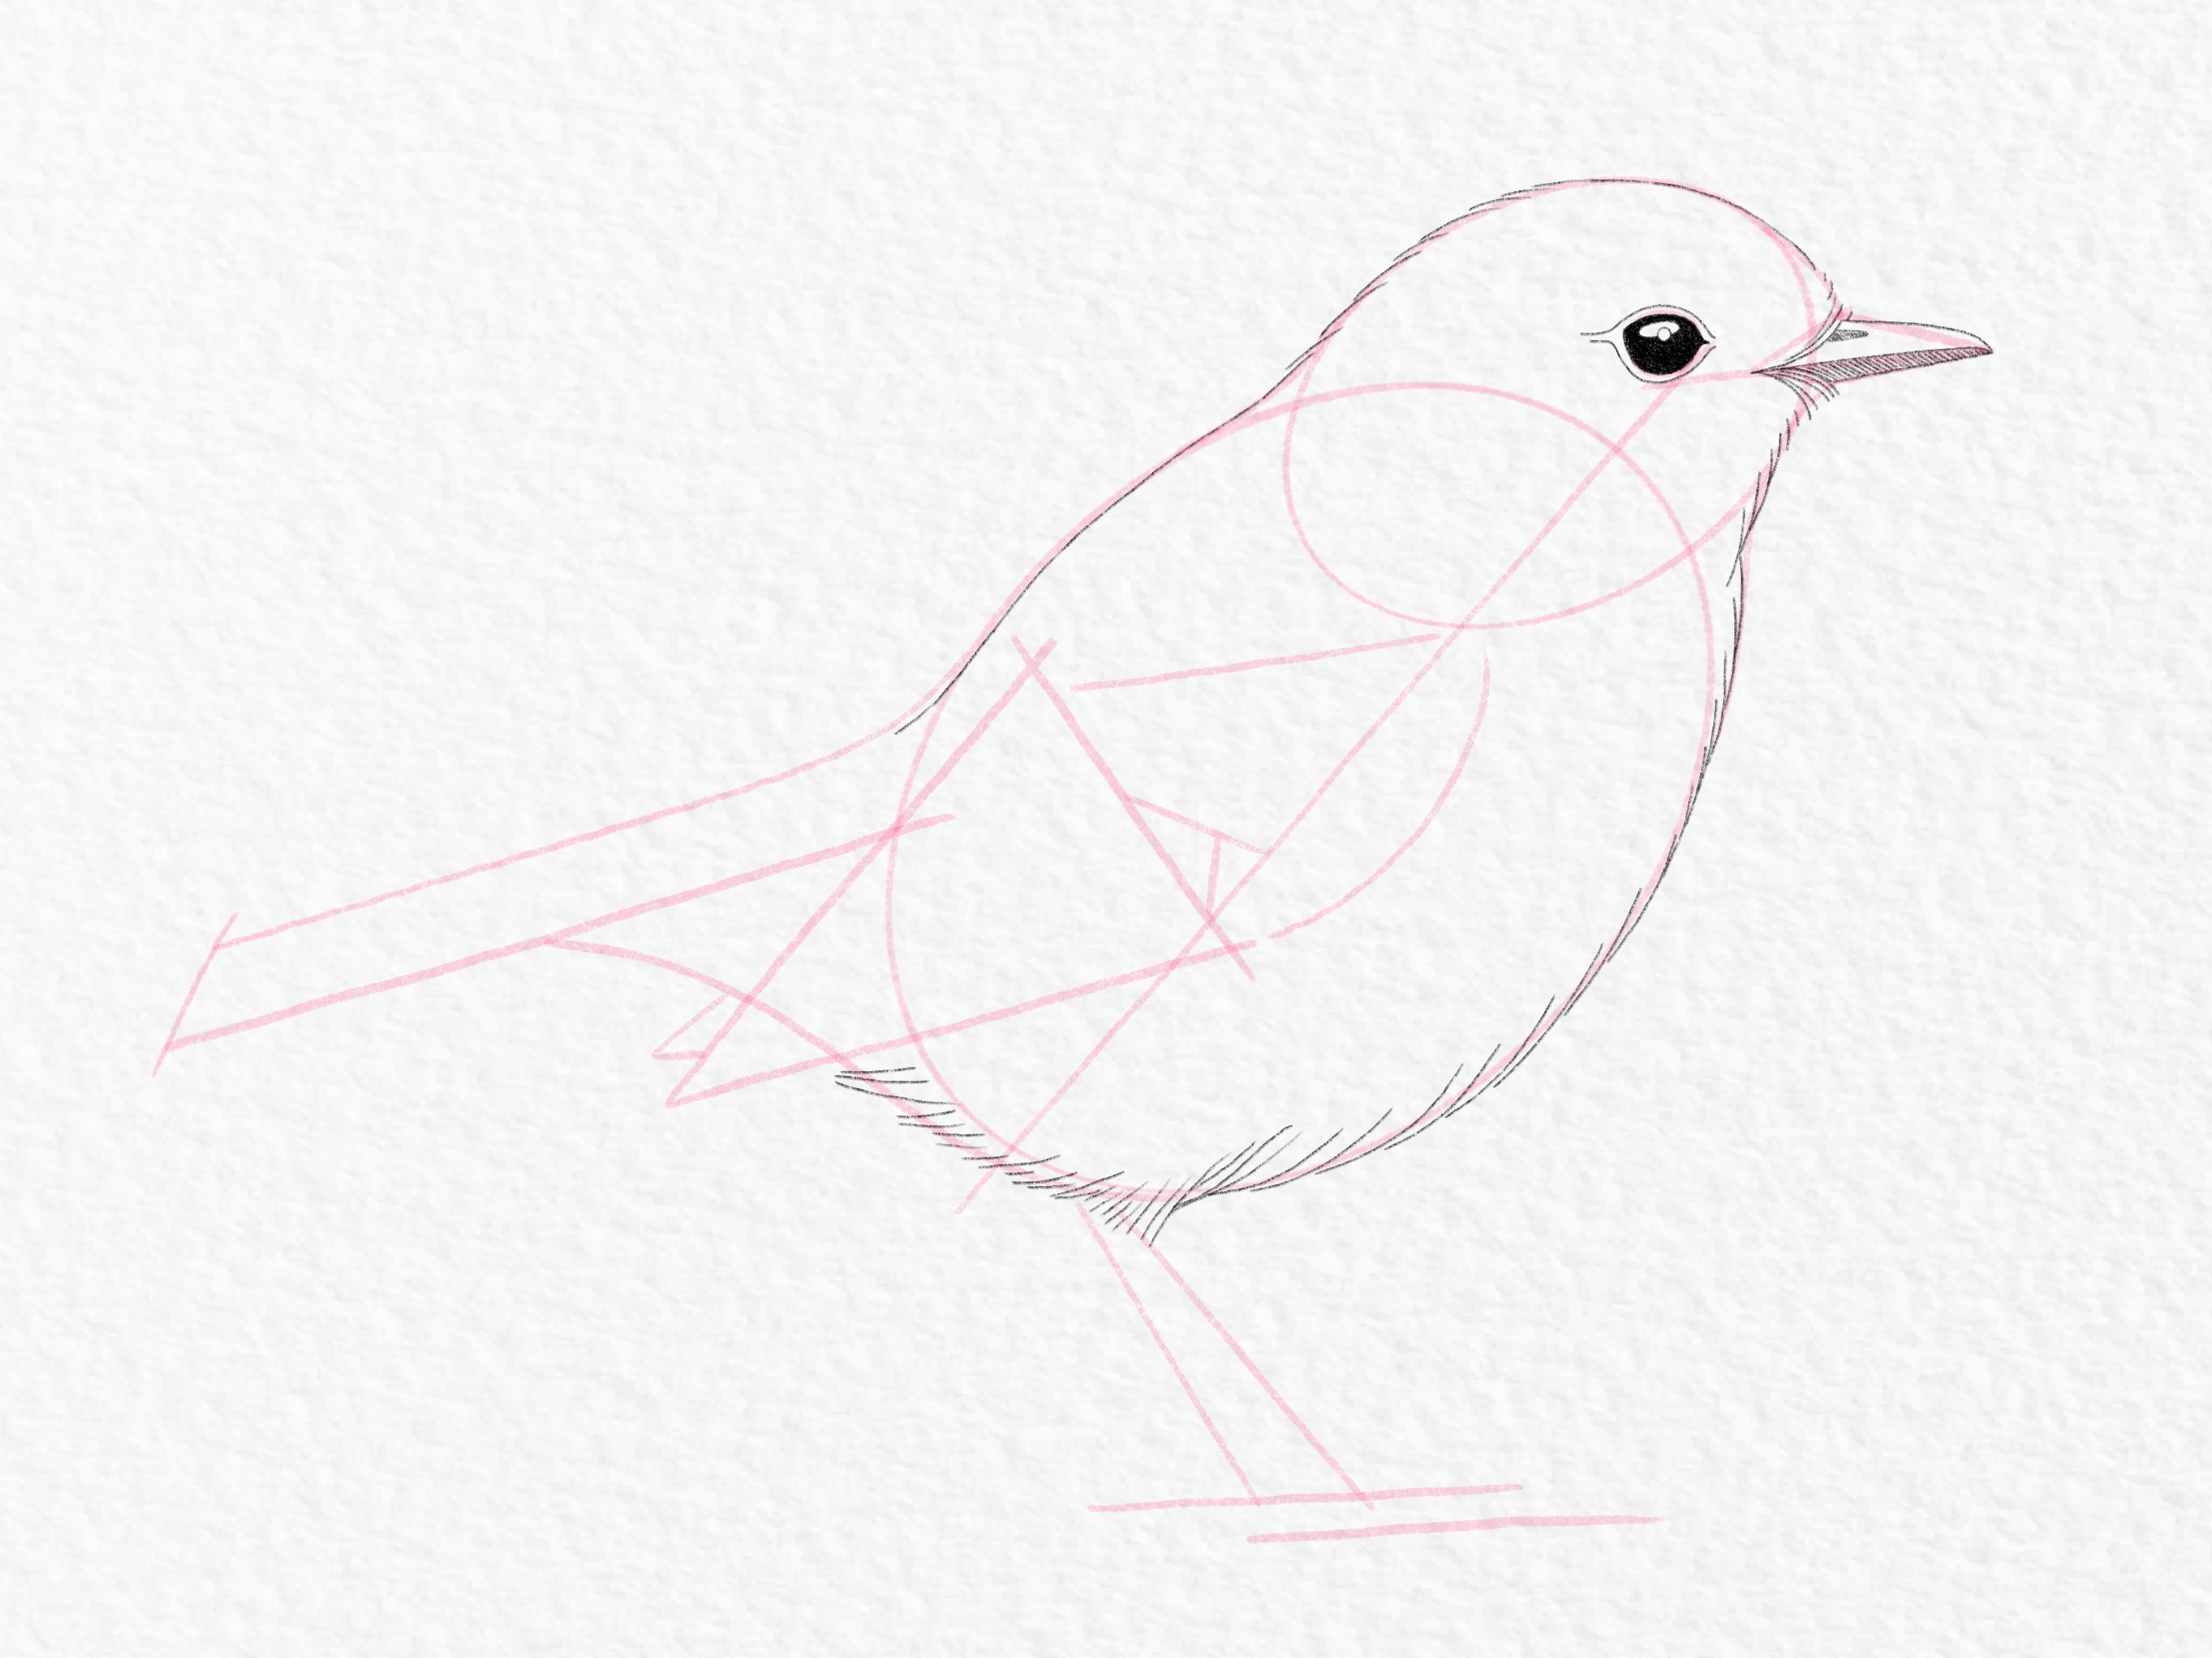 How to draw a bird – Step 10